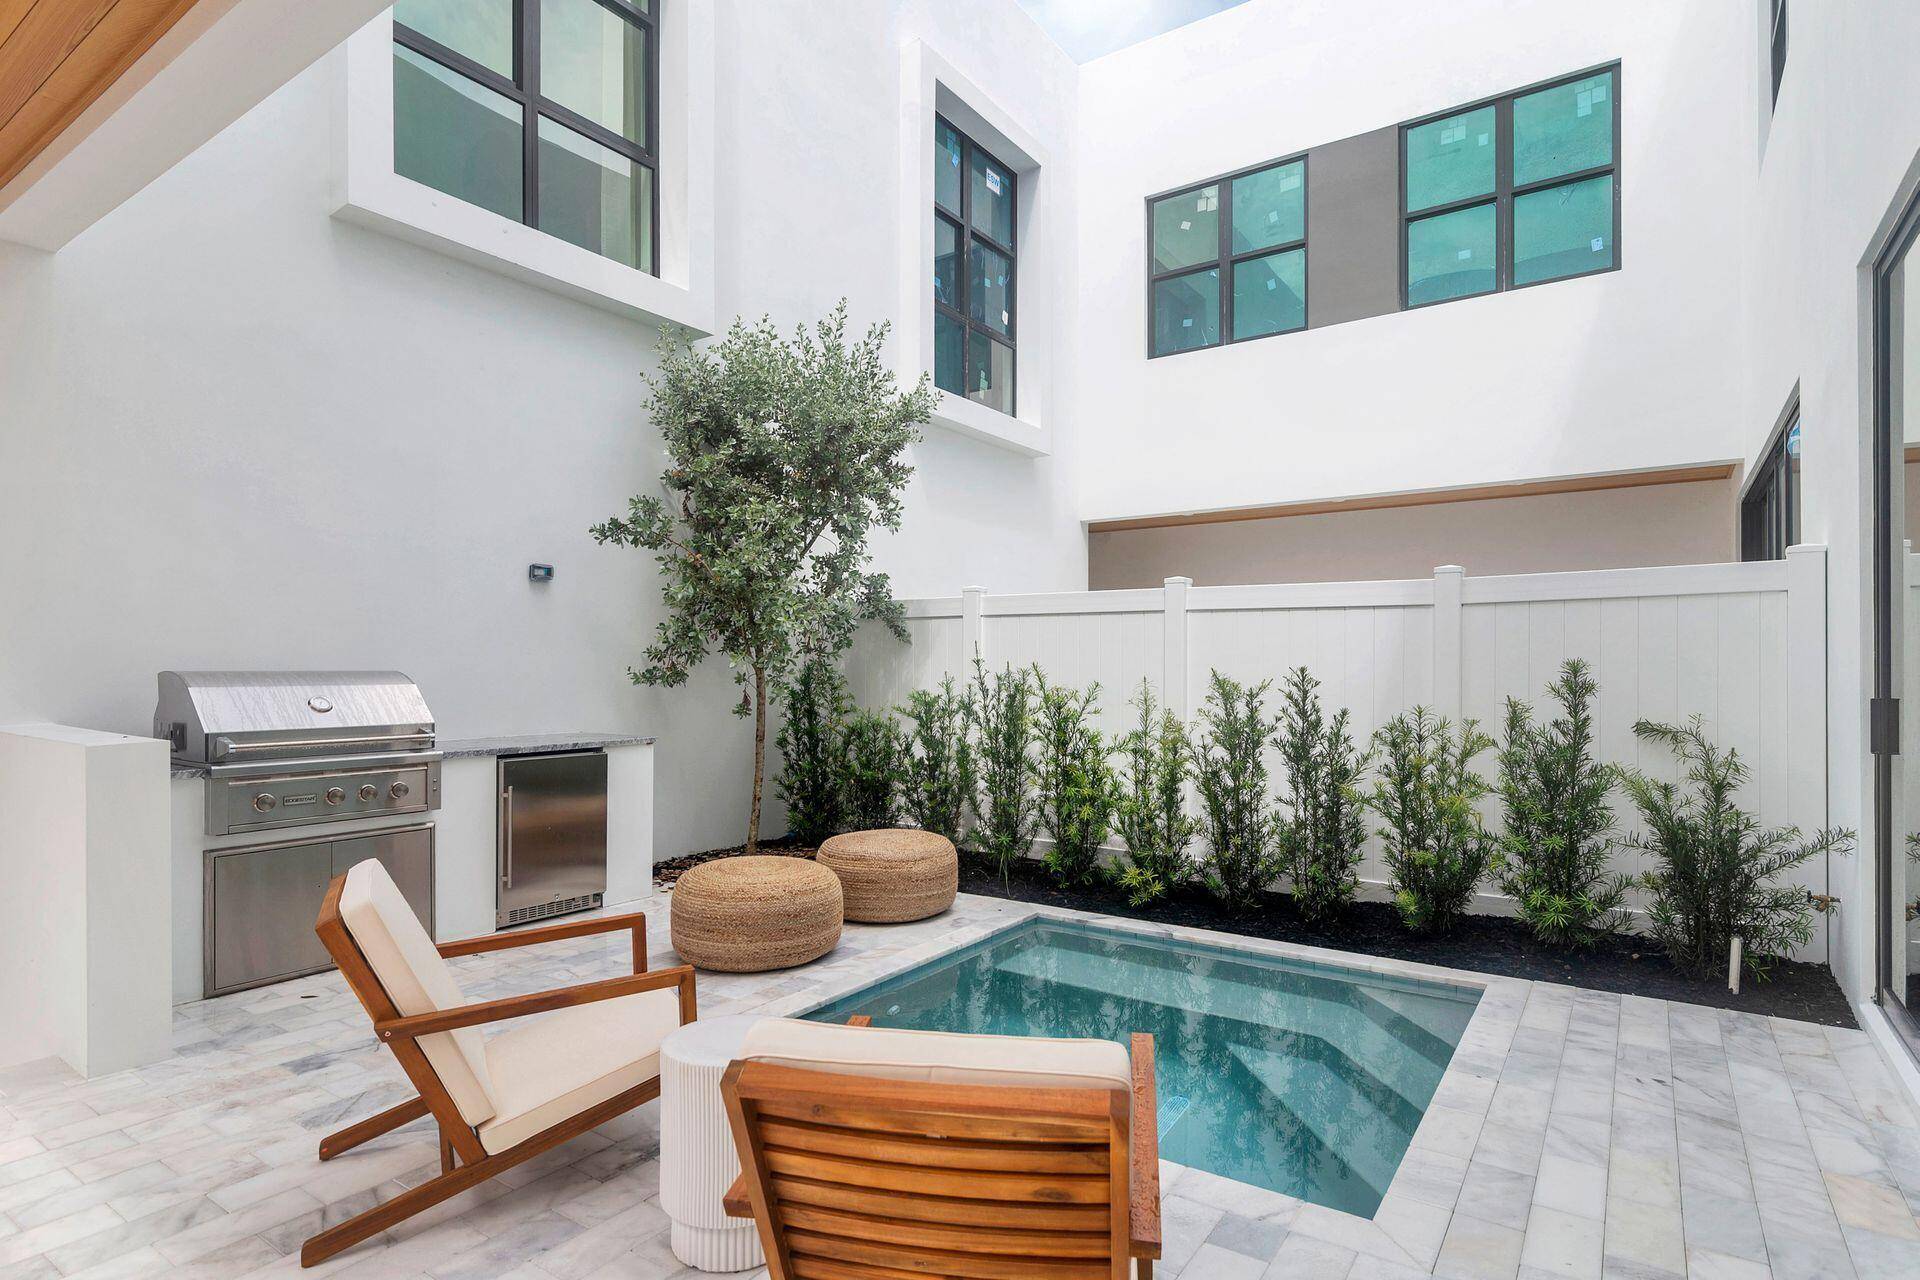 Known as Park Central, a sophisticated modern townhome community, was thoughtfully designed by award winning Borrero architecture firm and built by Sam Fisch Development.